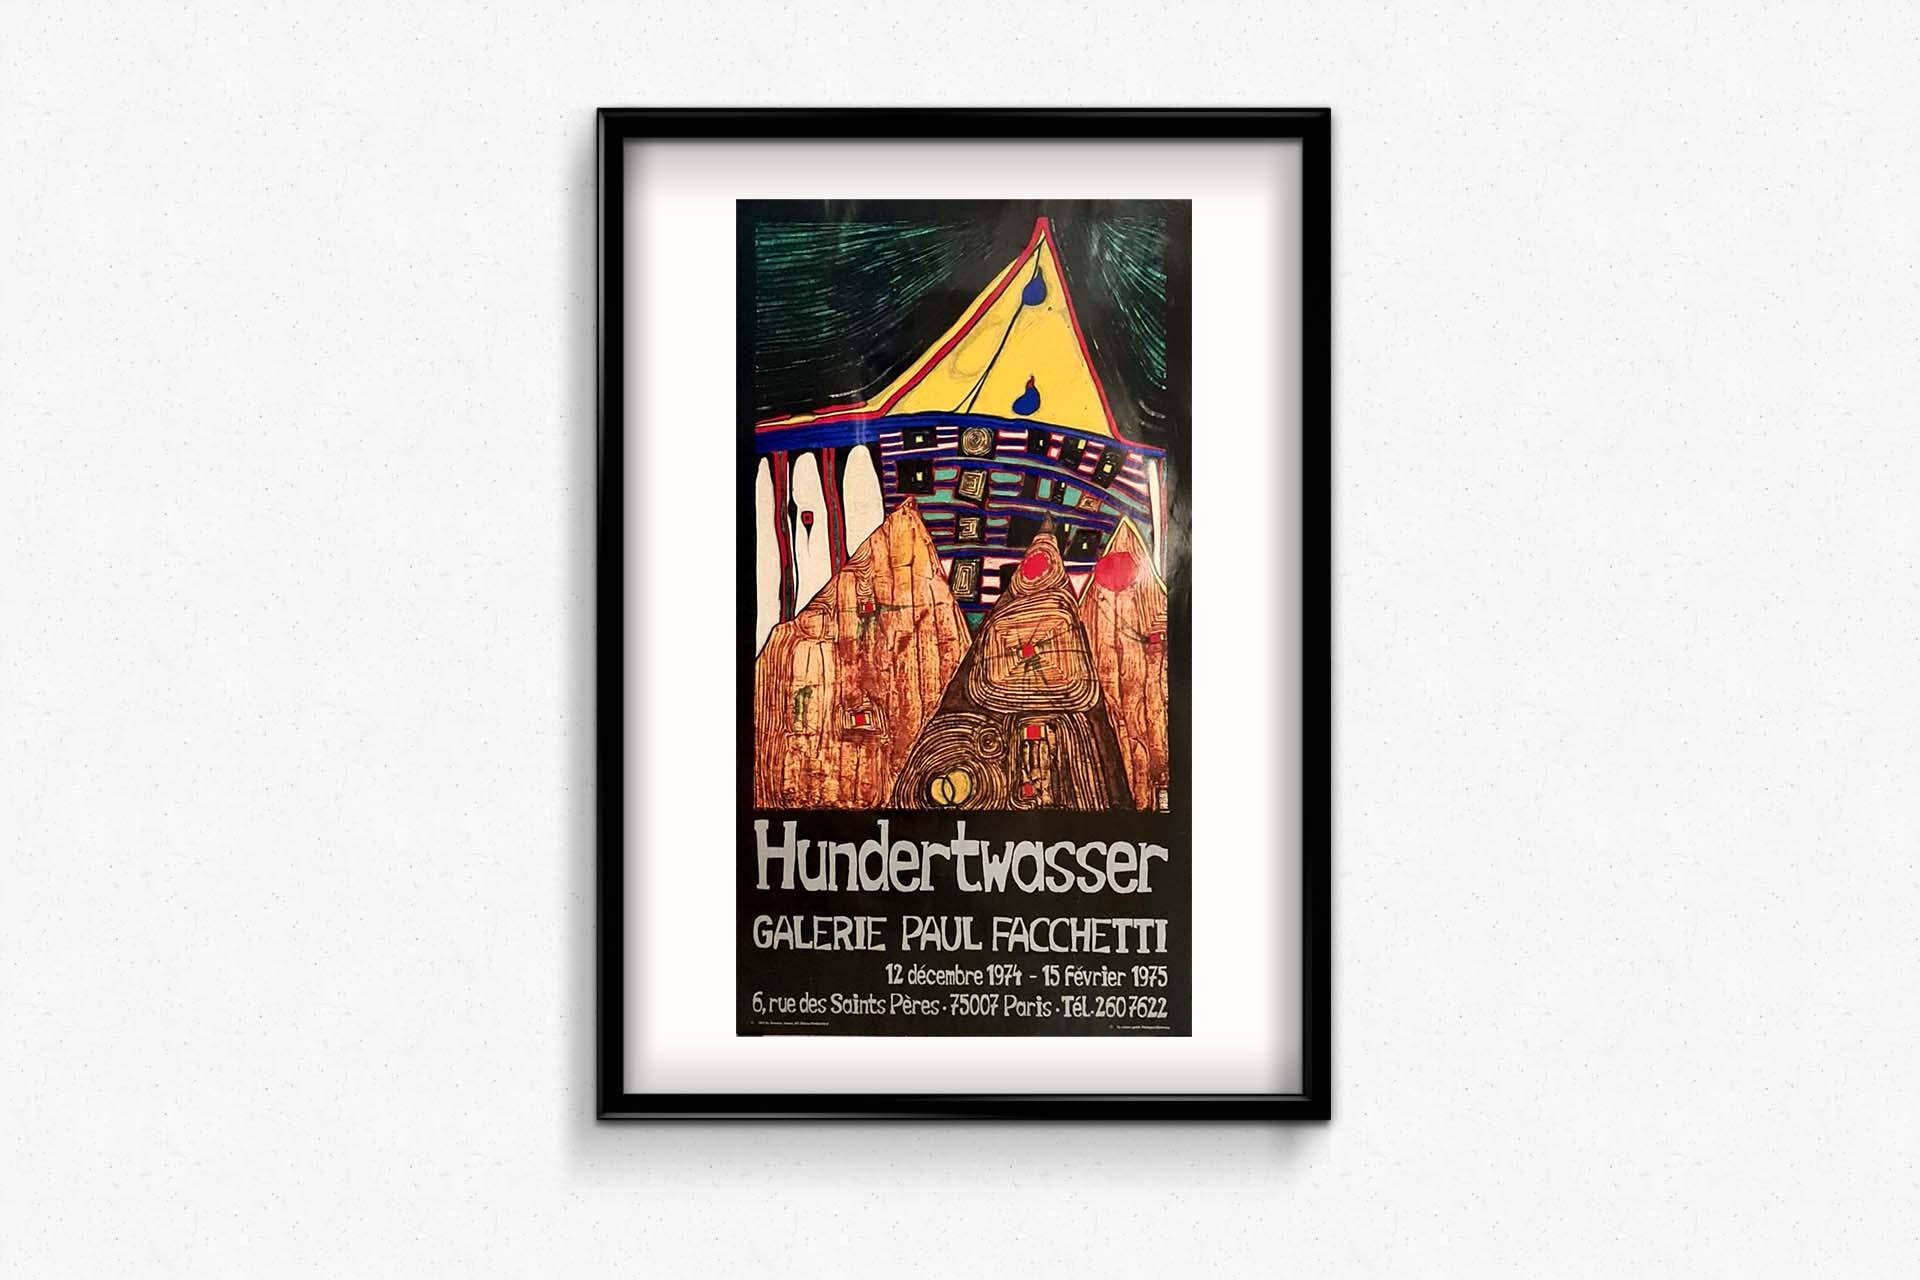 1975 Original poster of Hundertwasser's exhibition at the Paul Facchetti Gallery - Surrealist Print by Unknown